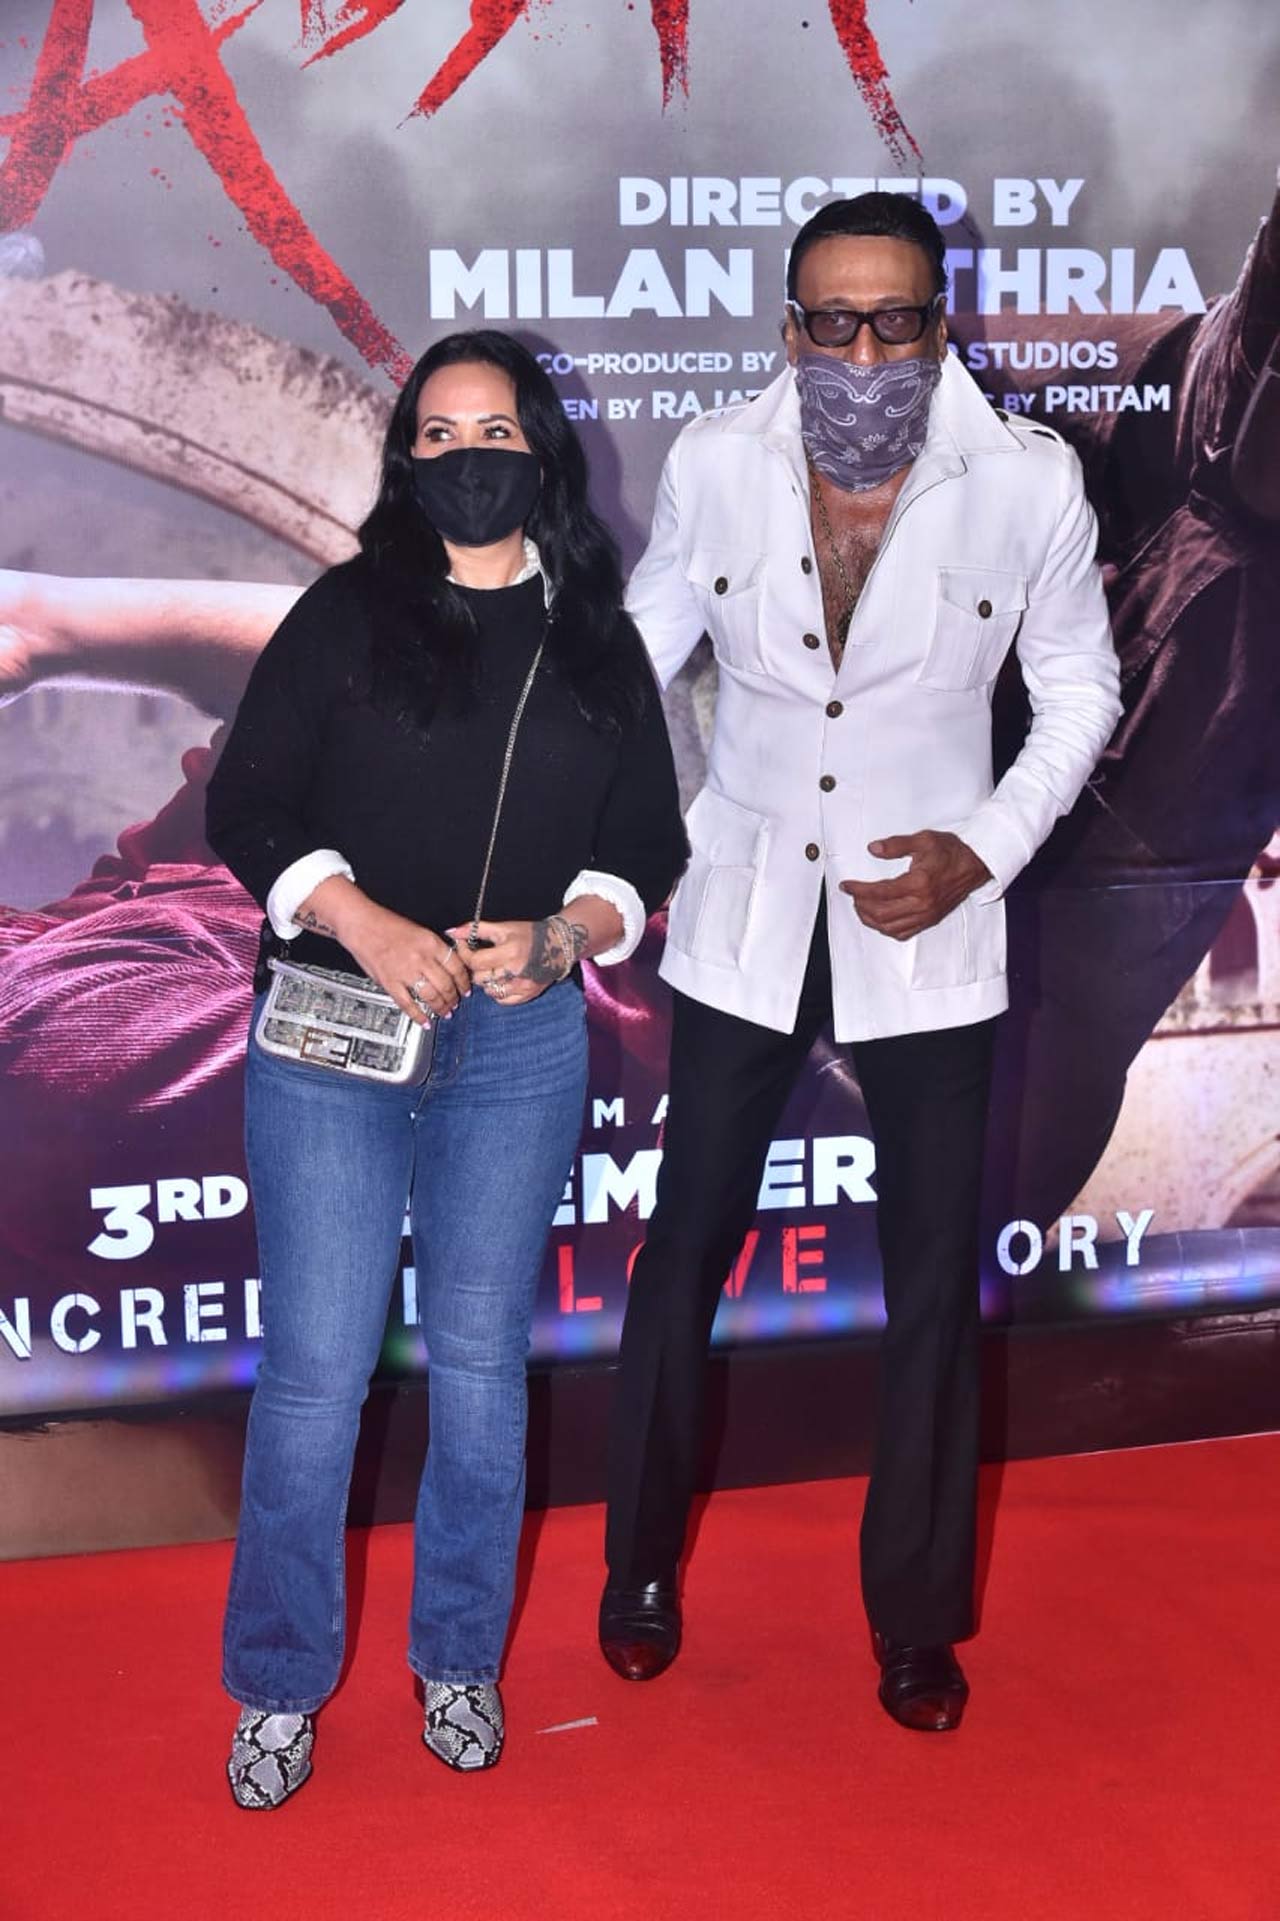 Jackie Shroff and Ayesha Shroff were also among the few guests to attend the show. While Jackie suited up, Ayesha kept it casual at the screening.